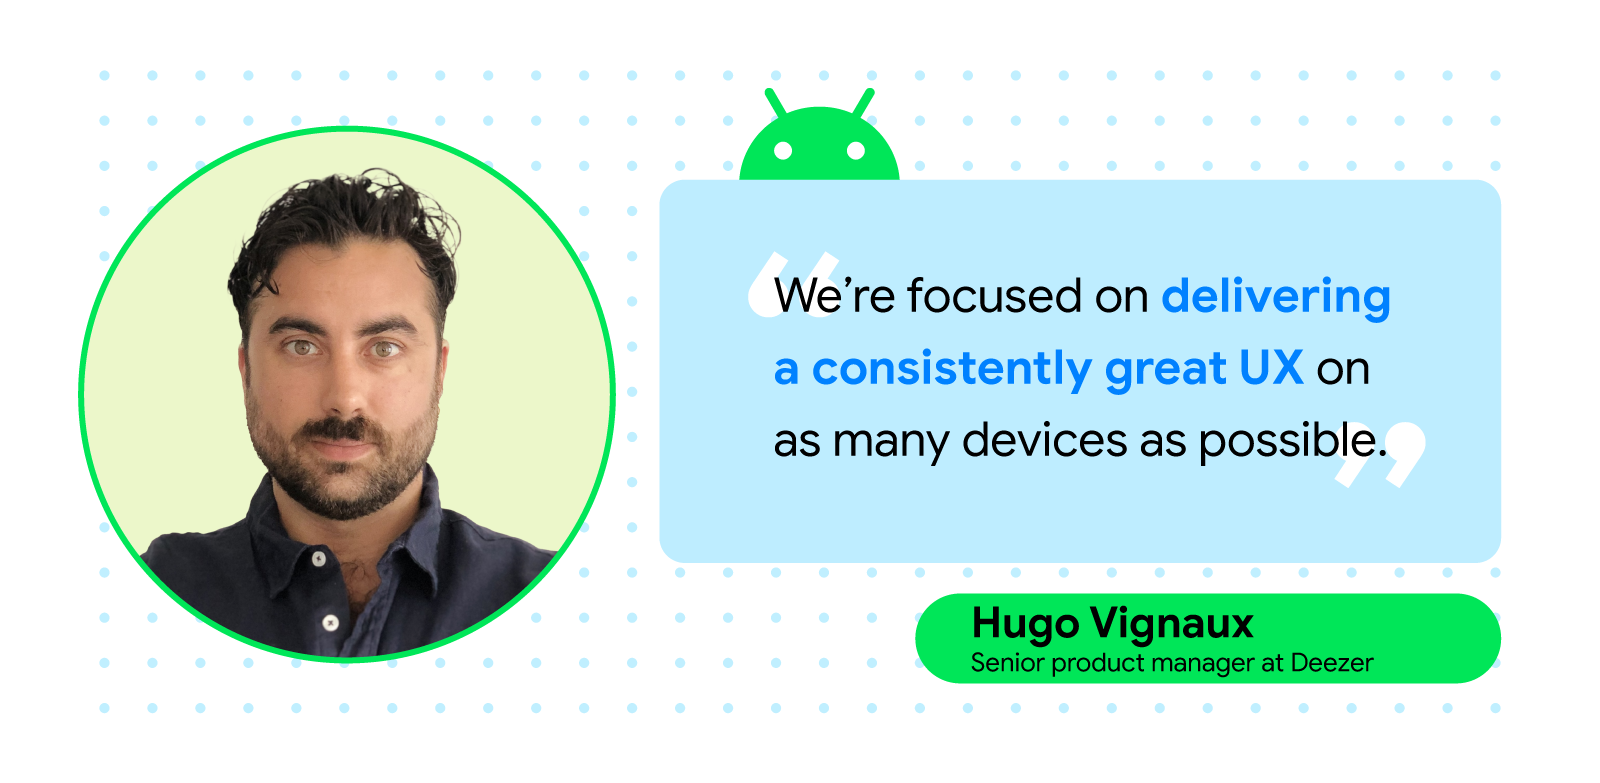 We’re focused on delivering a consistently great UX on as many devices as possible.” — Hugo Vignaux, senior product manager at Deezer